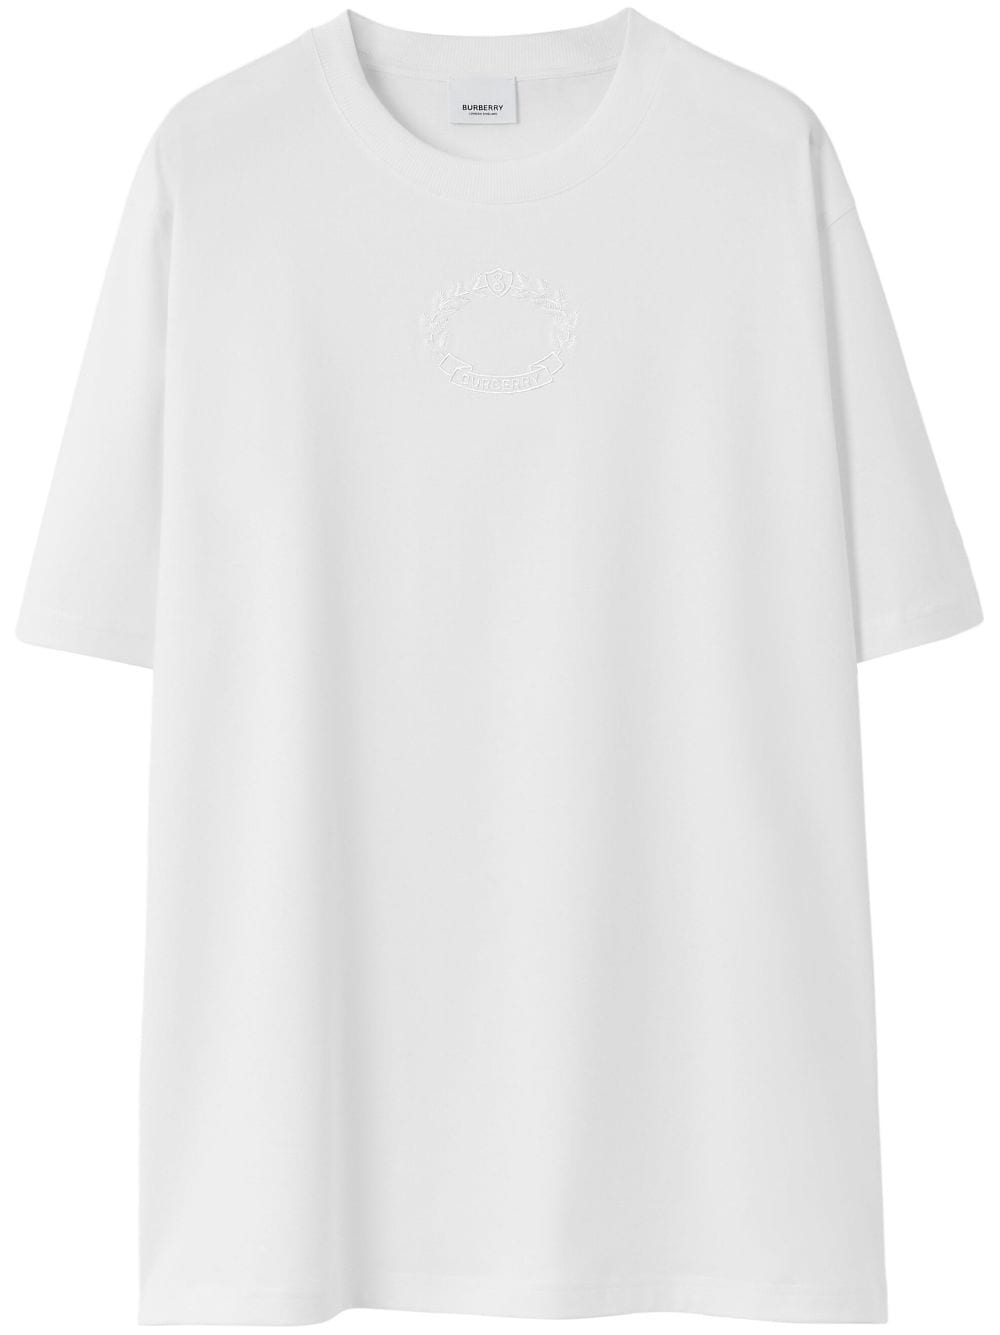 Burberry embroidered Oak Leaf Crest cotton T-shirt - White